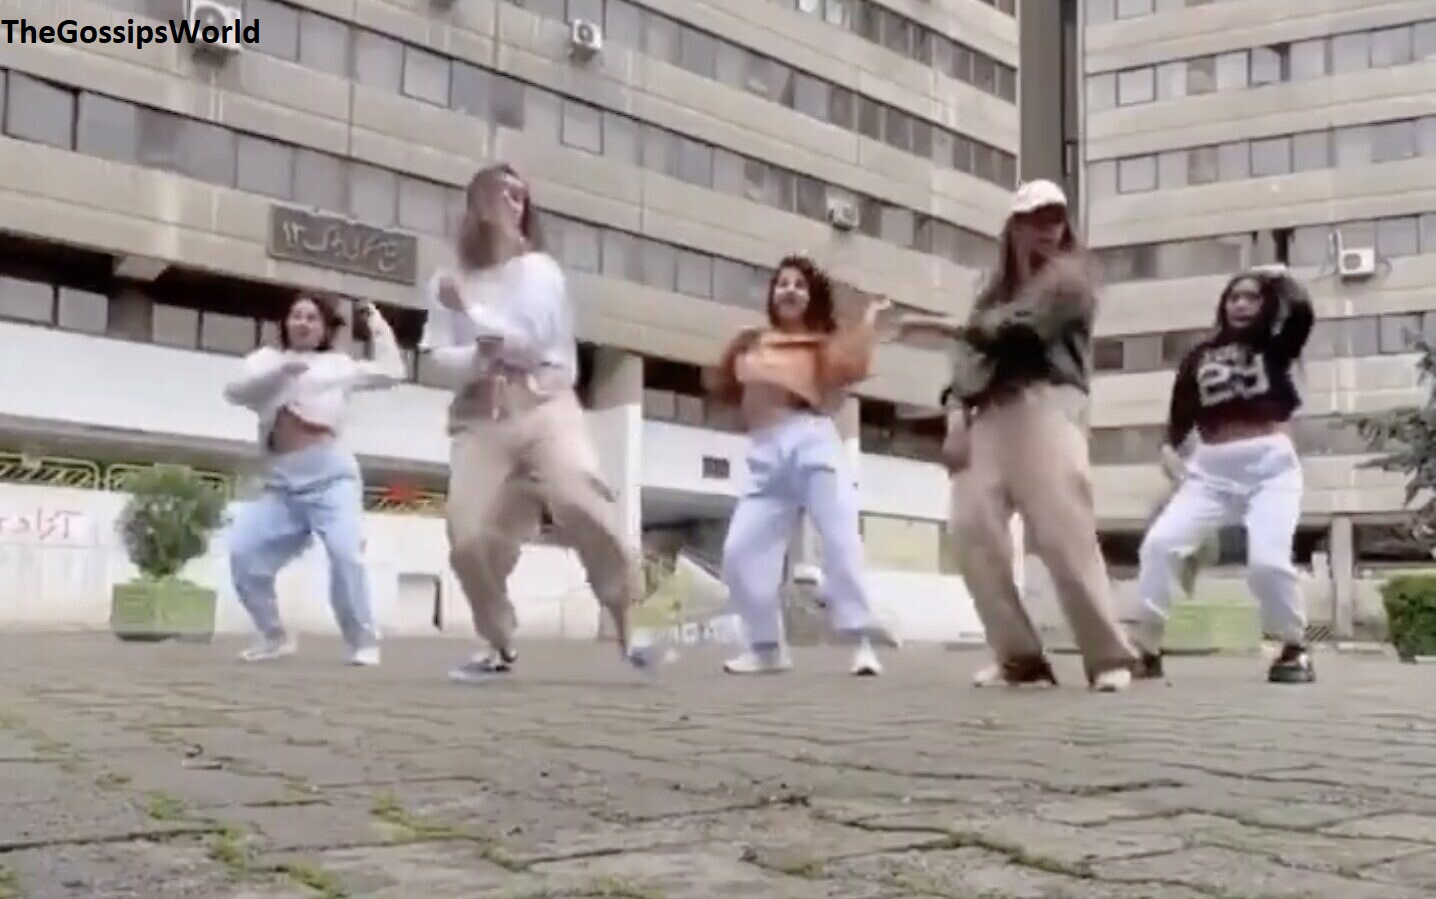 Iranian Women Dancing Without Headscarves On Calm Down Video